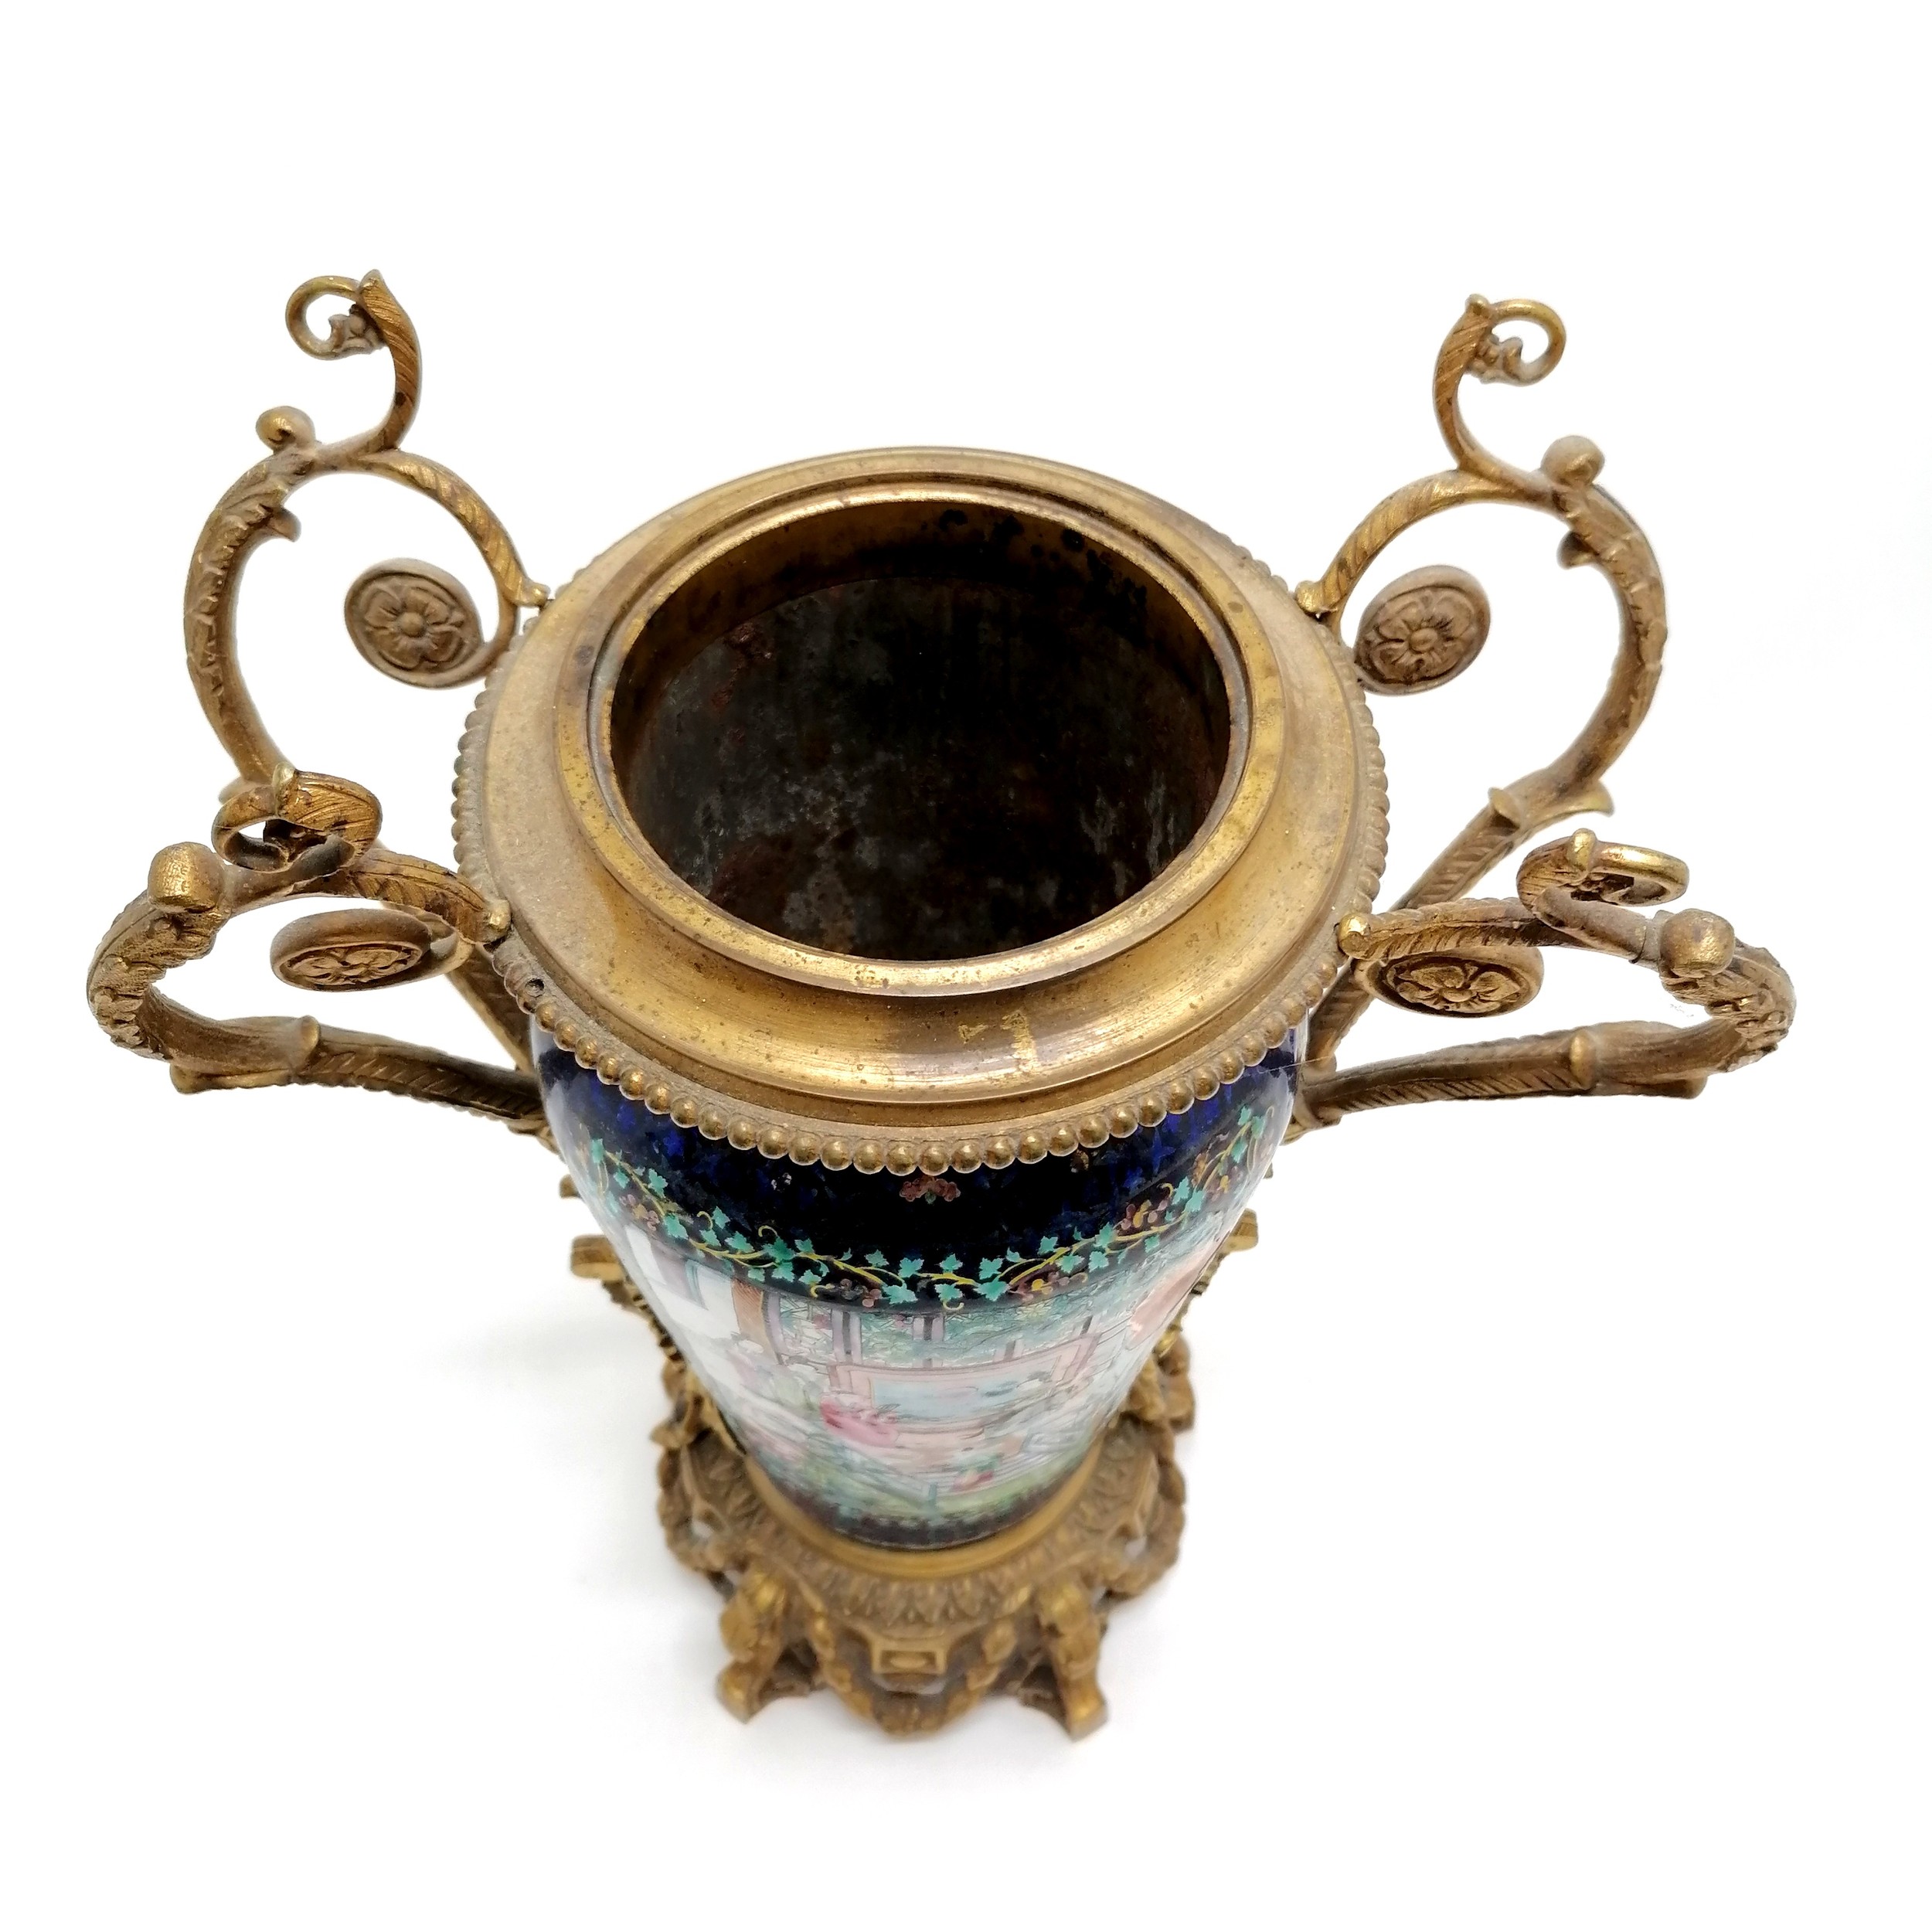 Antique Chinese Cantonese enamelled vase with French ormolu mounts - 35cm high missing it's lid - Image 2 of 8